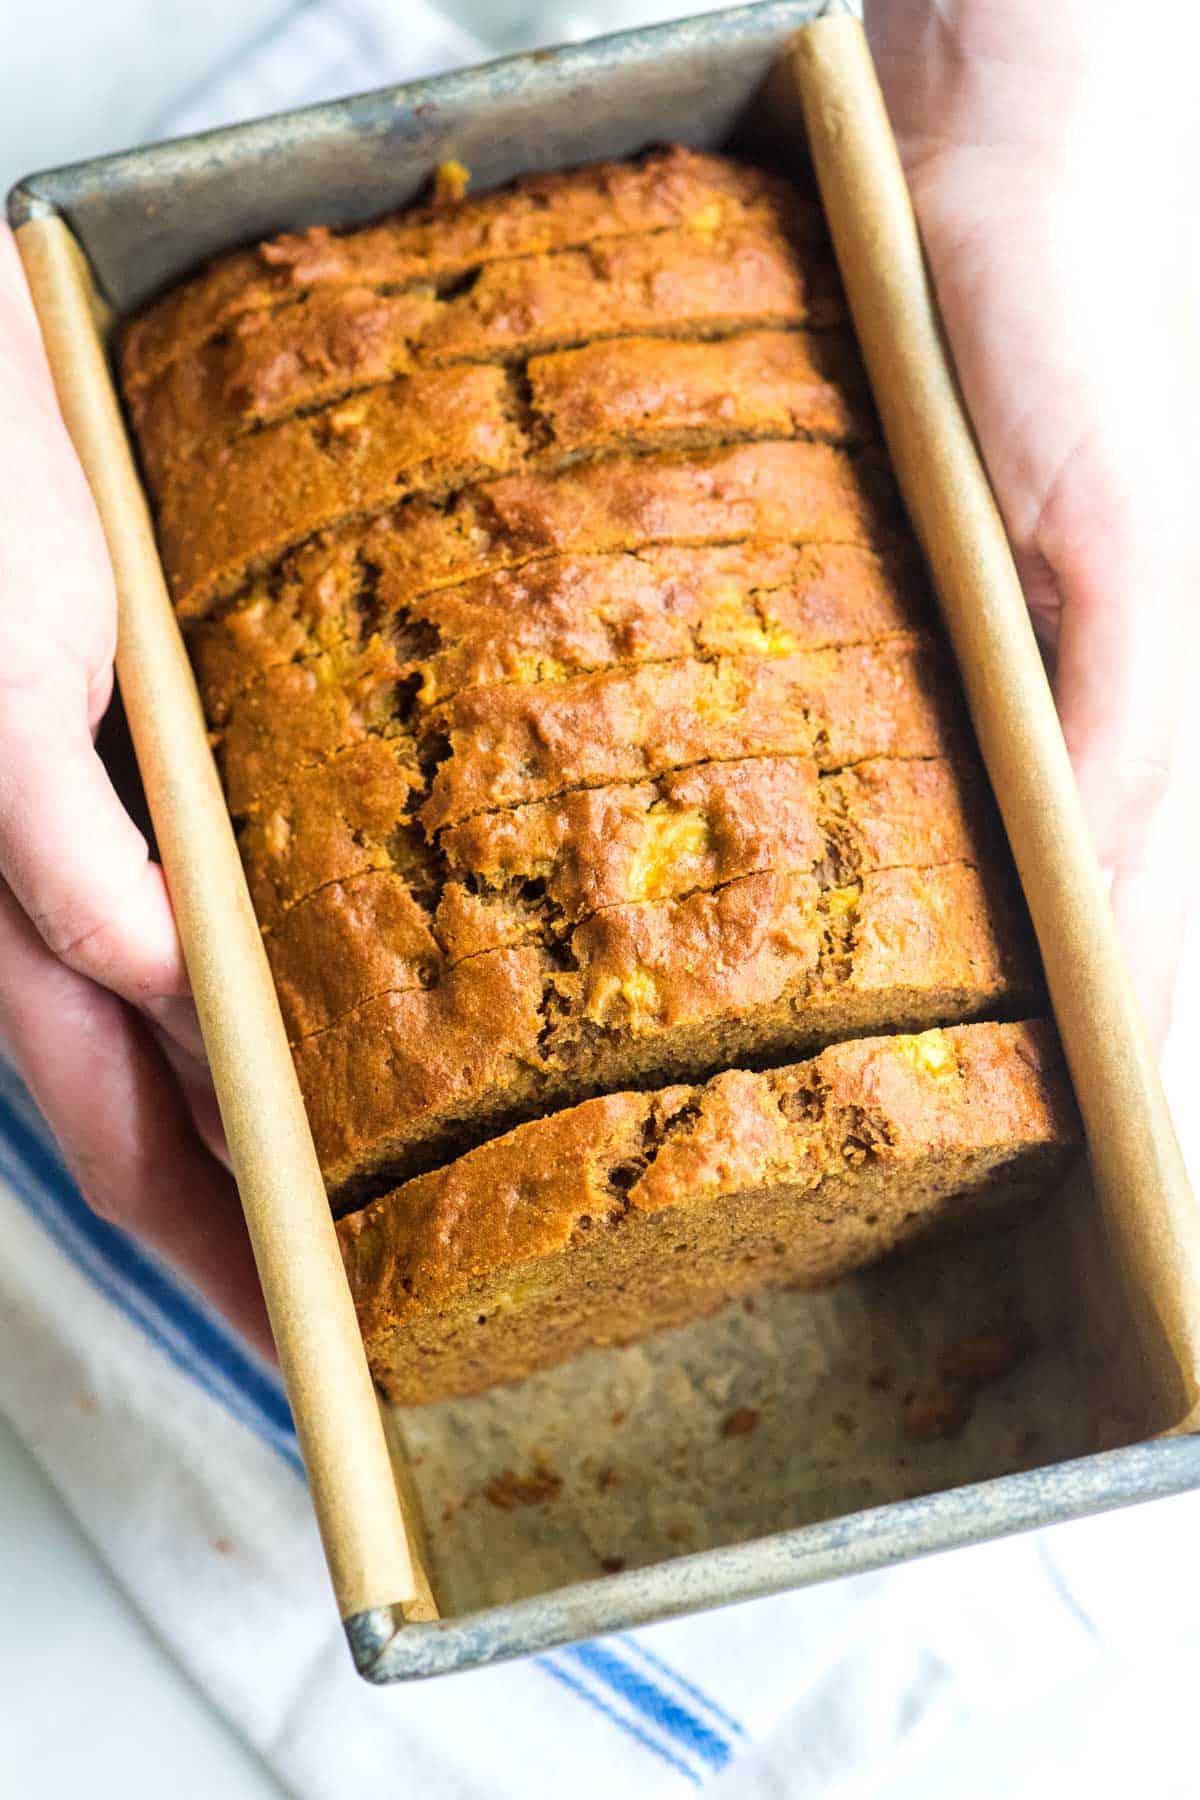 baked banana bread made with lower sugar and added whole grains